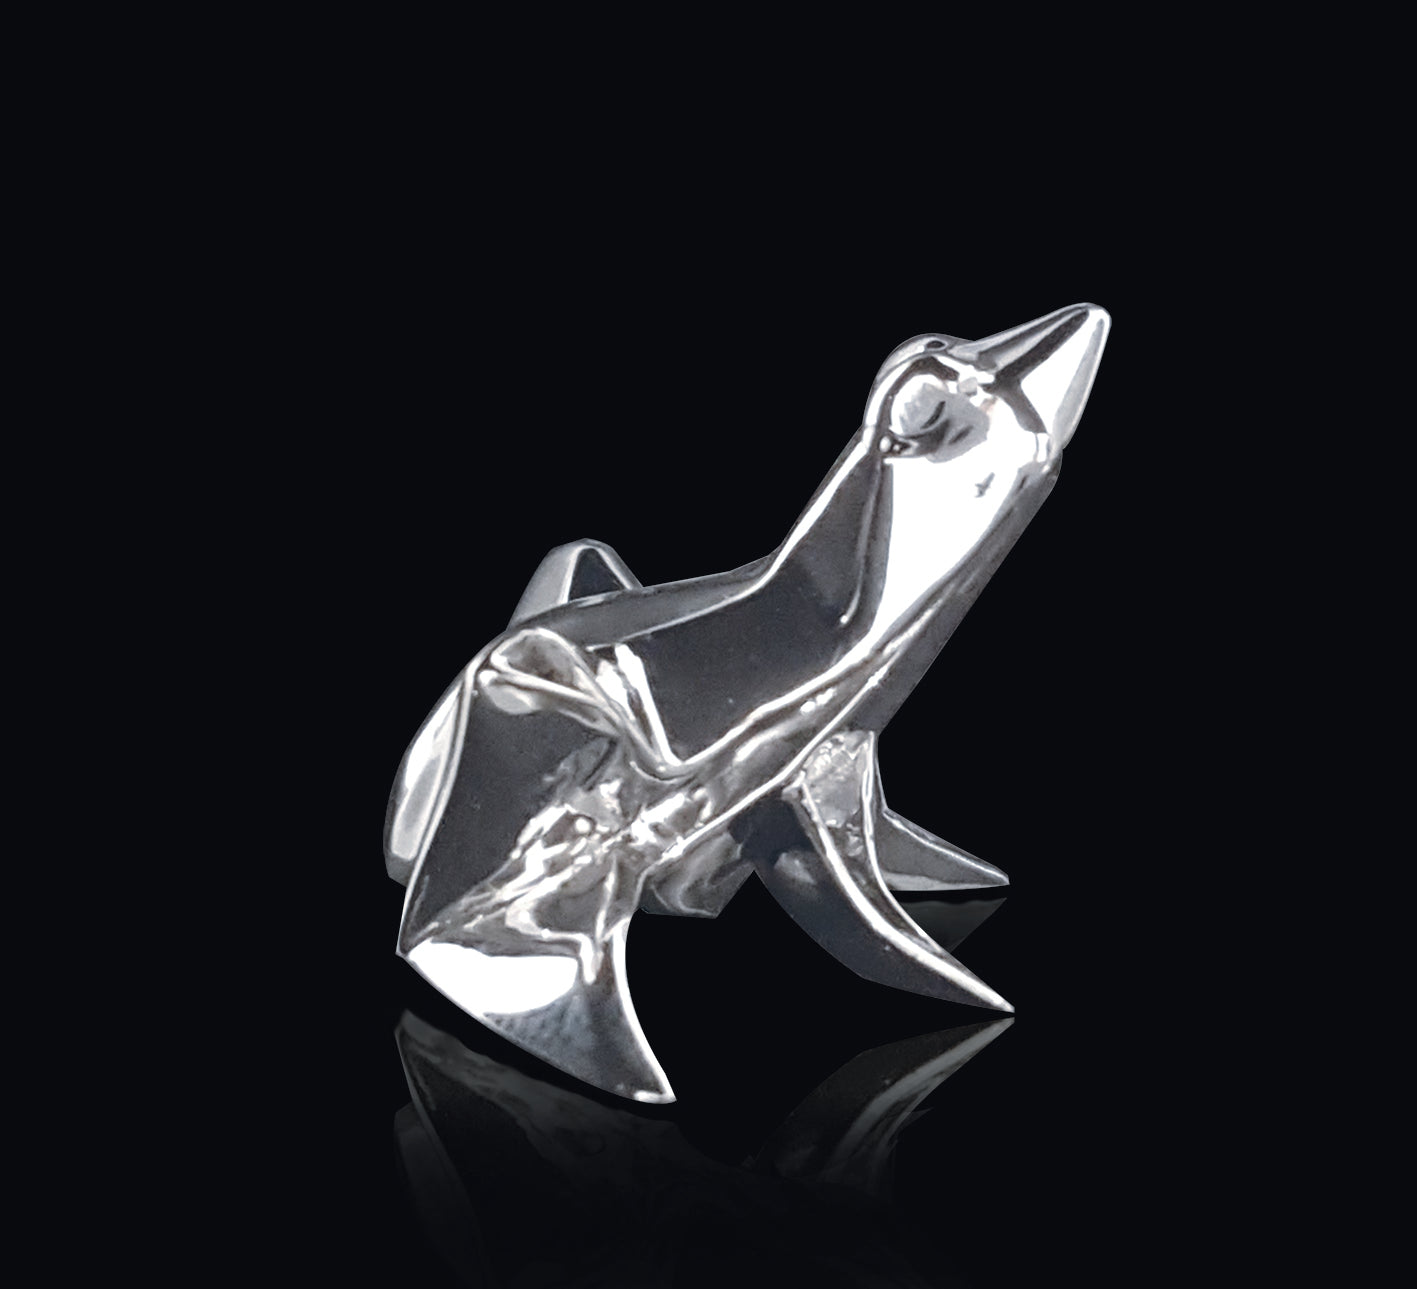 Frog Sterling Silver Origami Sculpture by Sophie Mackrell